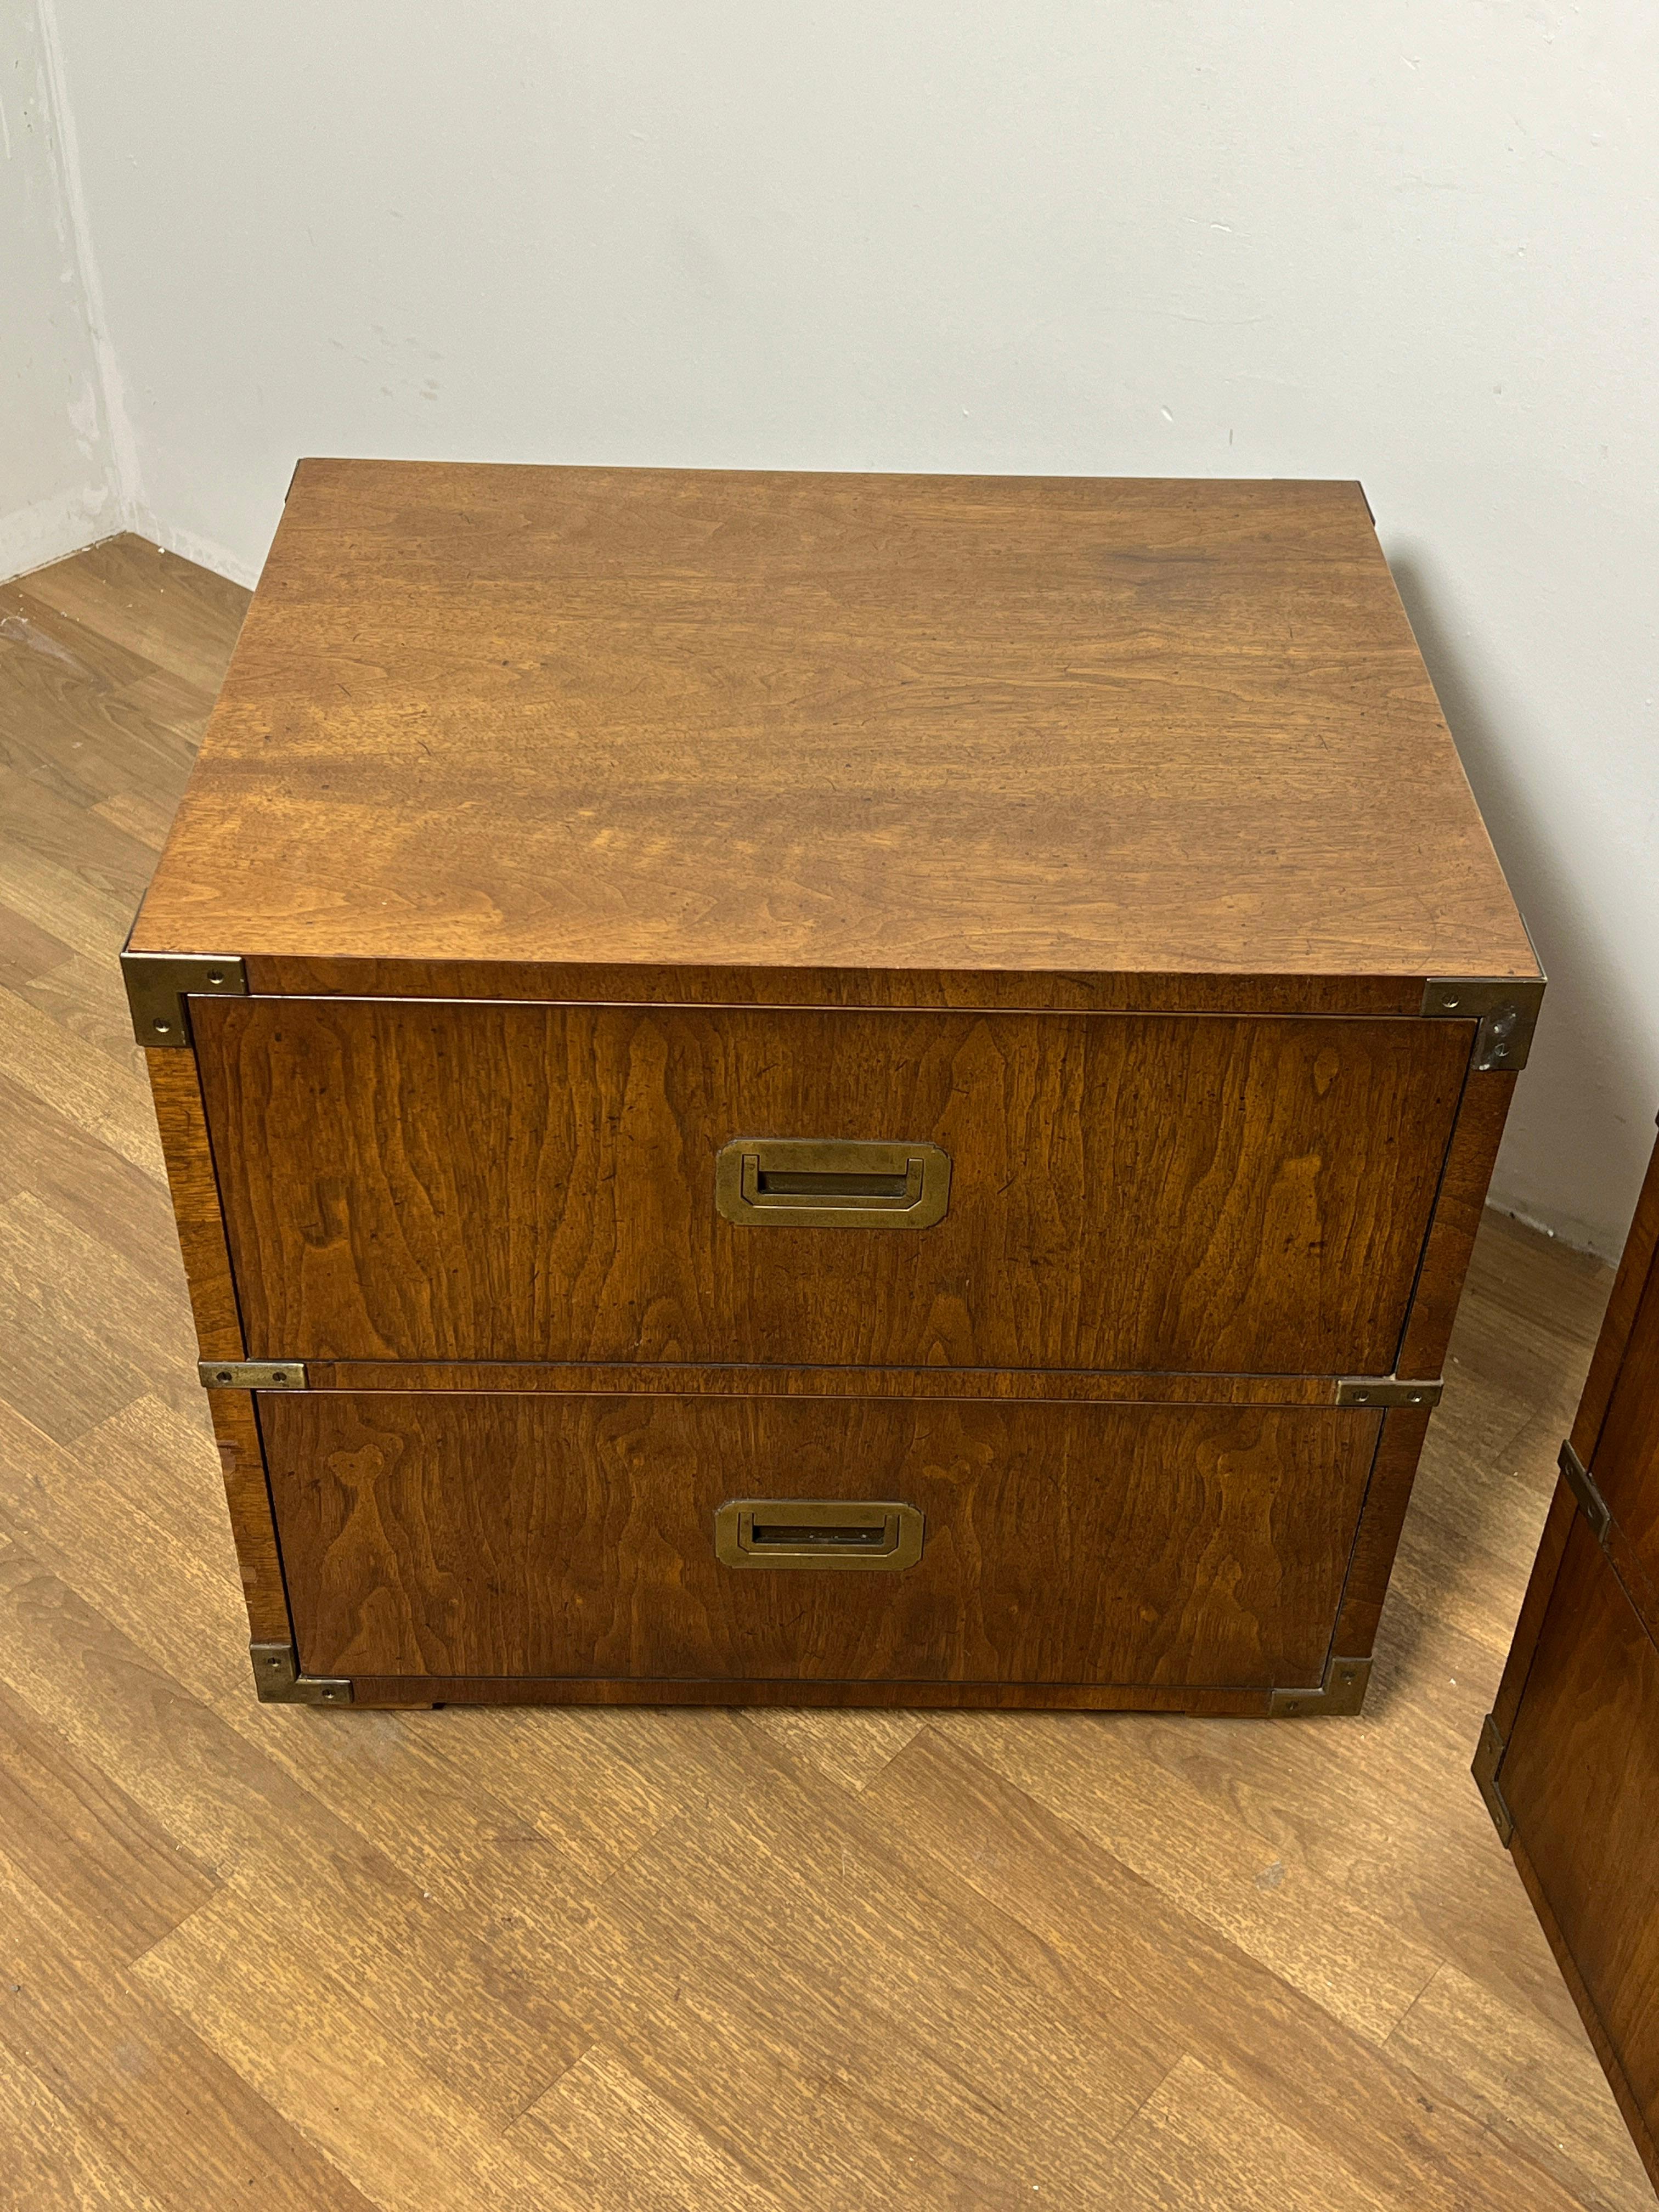 Pair of two drawer chest end tables in the campaign style with brass accents and handles, by Henredon, Circa 1970s.  Feet are removable, designed so that one chest can be stacked upon the other if desired.